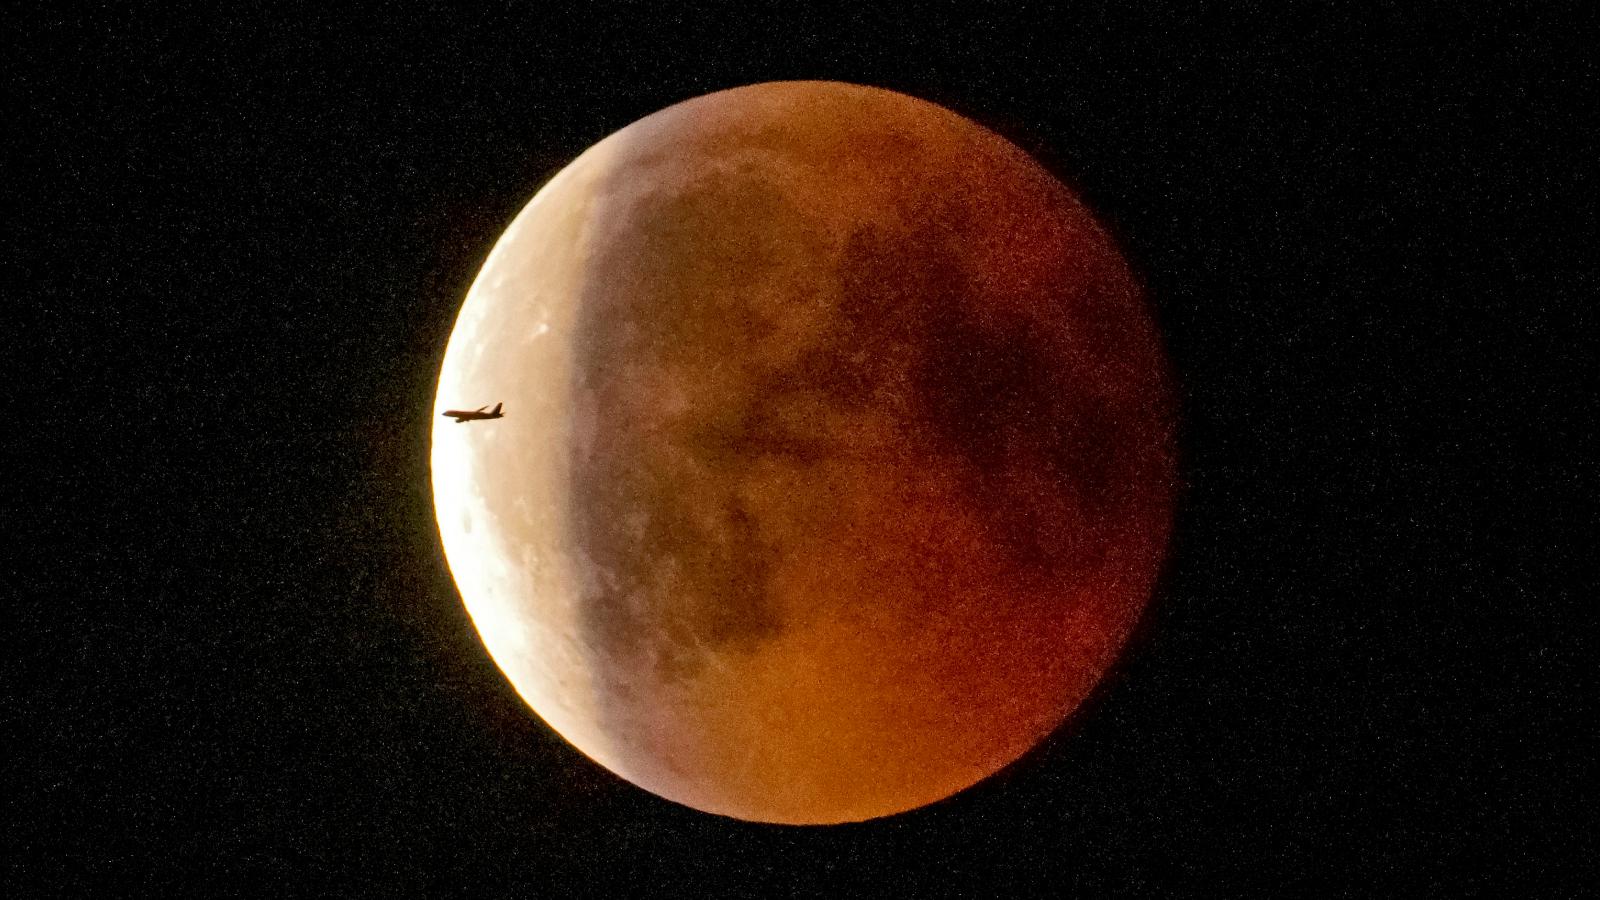 Lunar Eclipse July Image Of The Super Blood Moon And